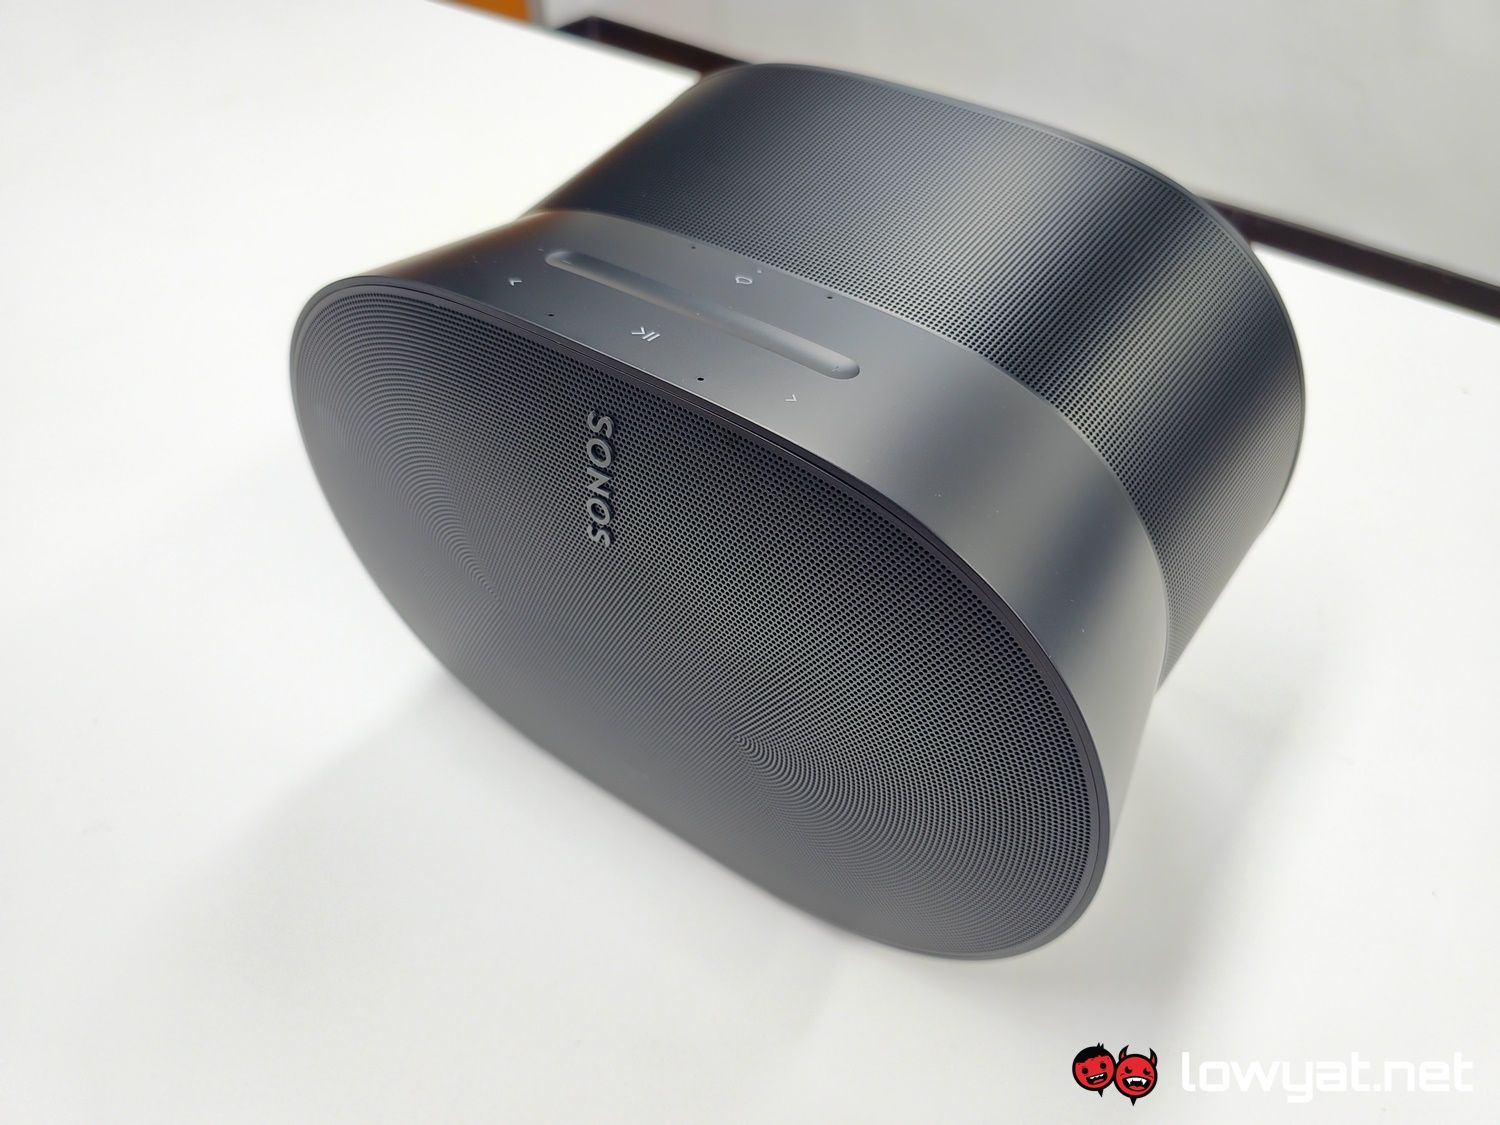 Sonos Era 300 Review: The Ultimate Dolby Atmos Speaker?